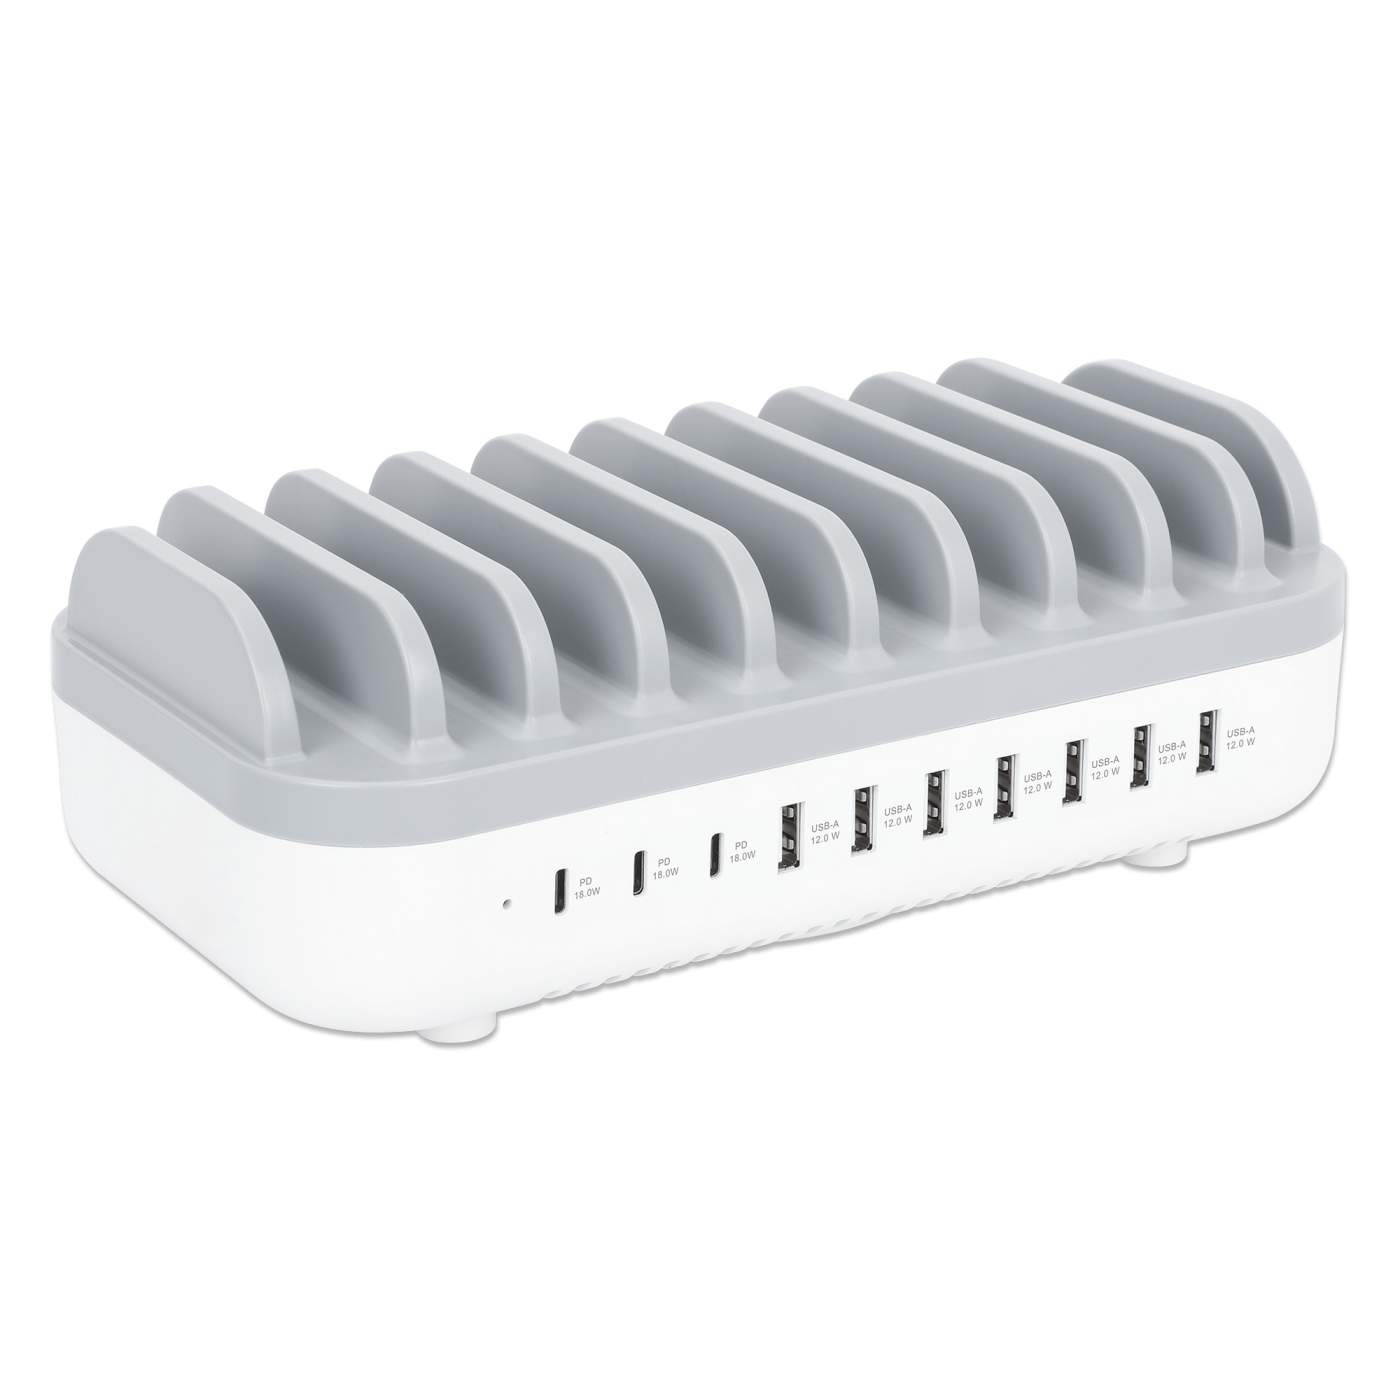 10-Port USB Power Delivery Charging Station - 120 W Image 3